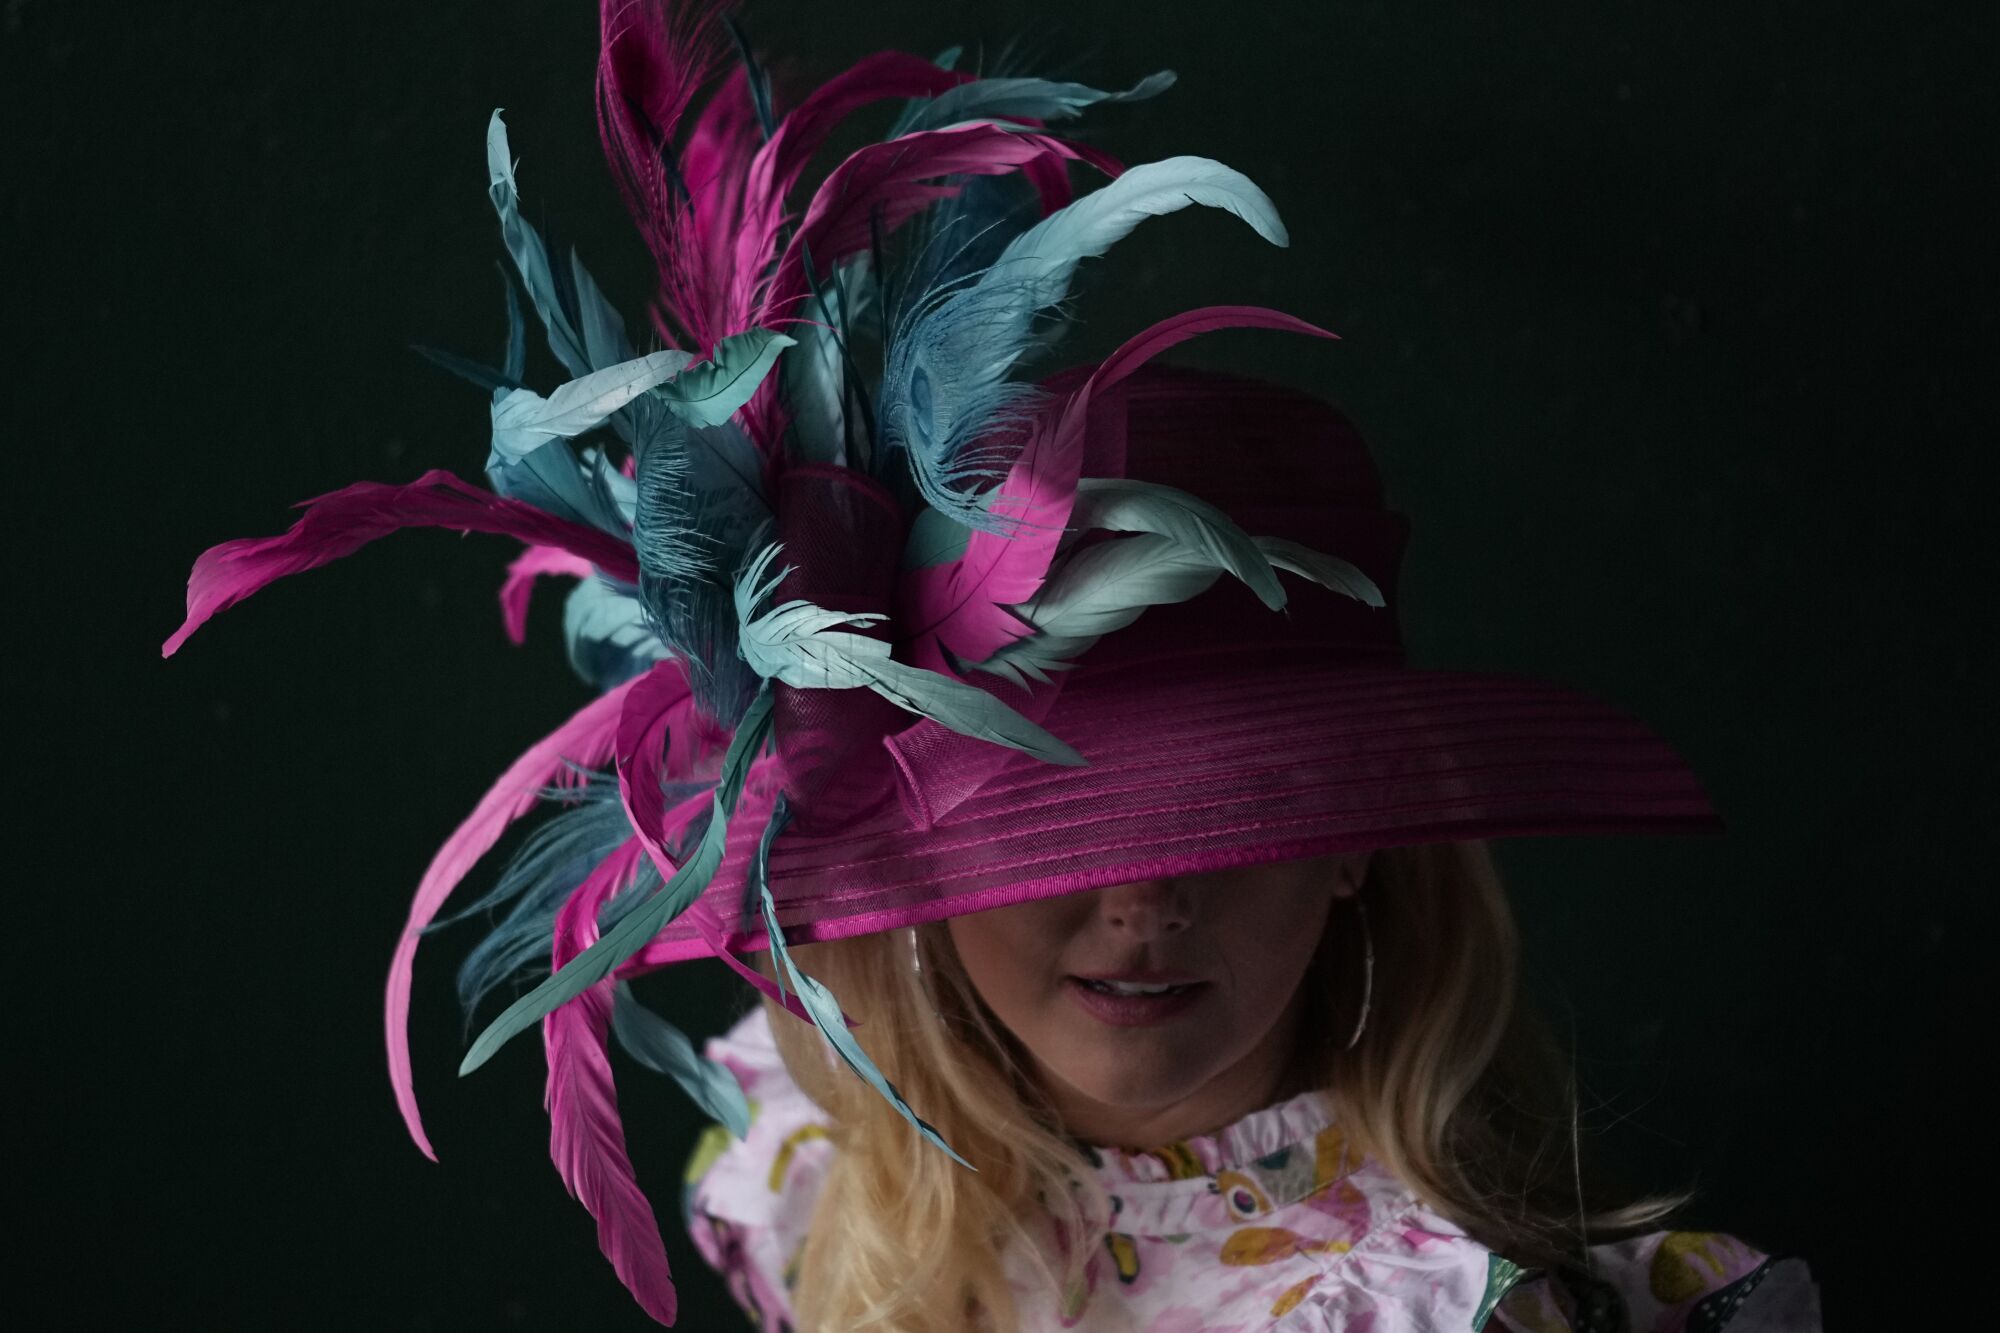 A woman wears a hat featuring a mix of pink and turquoise feathers at the Kentucky Derby on Saturday.